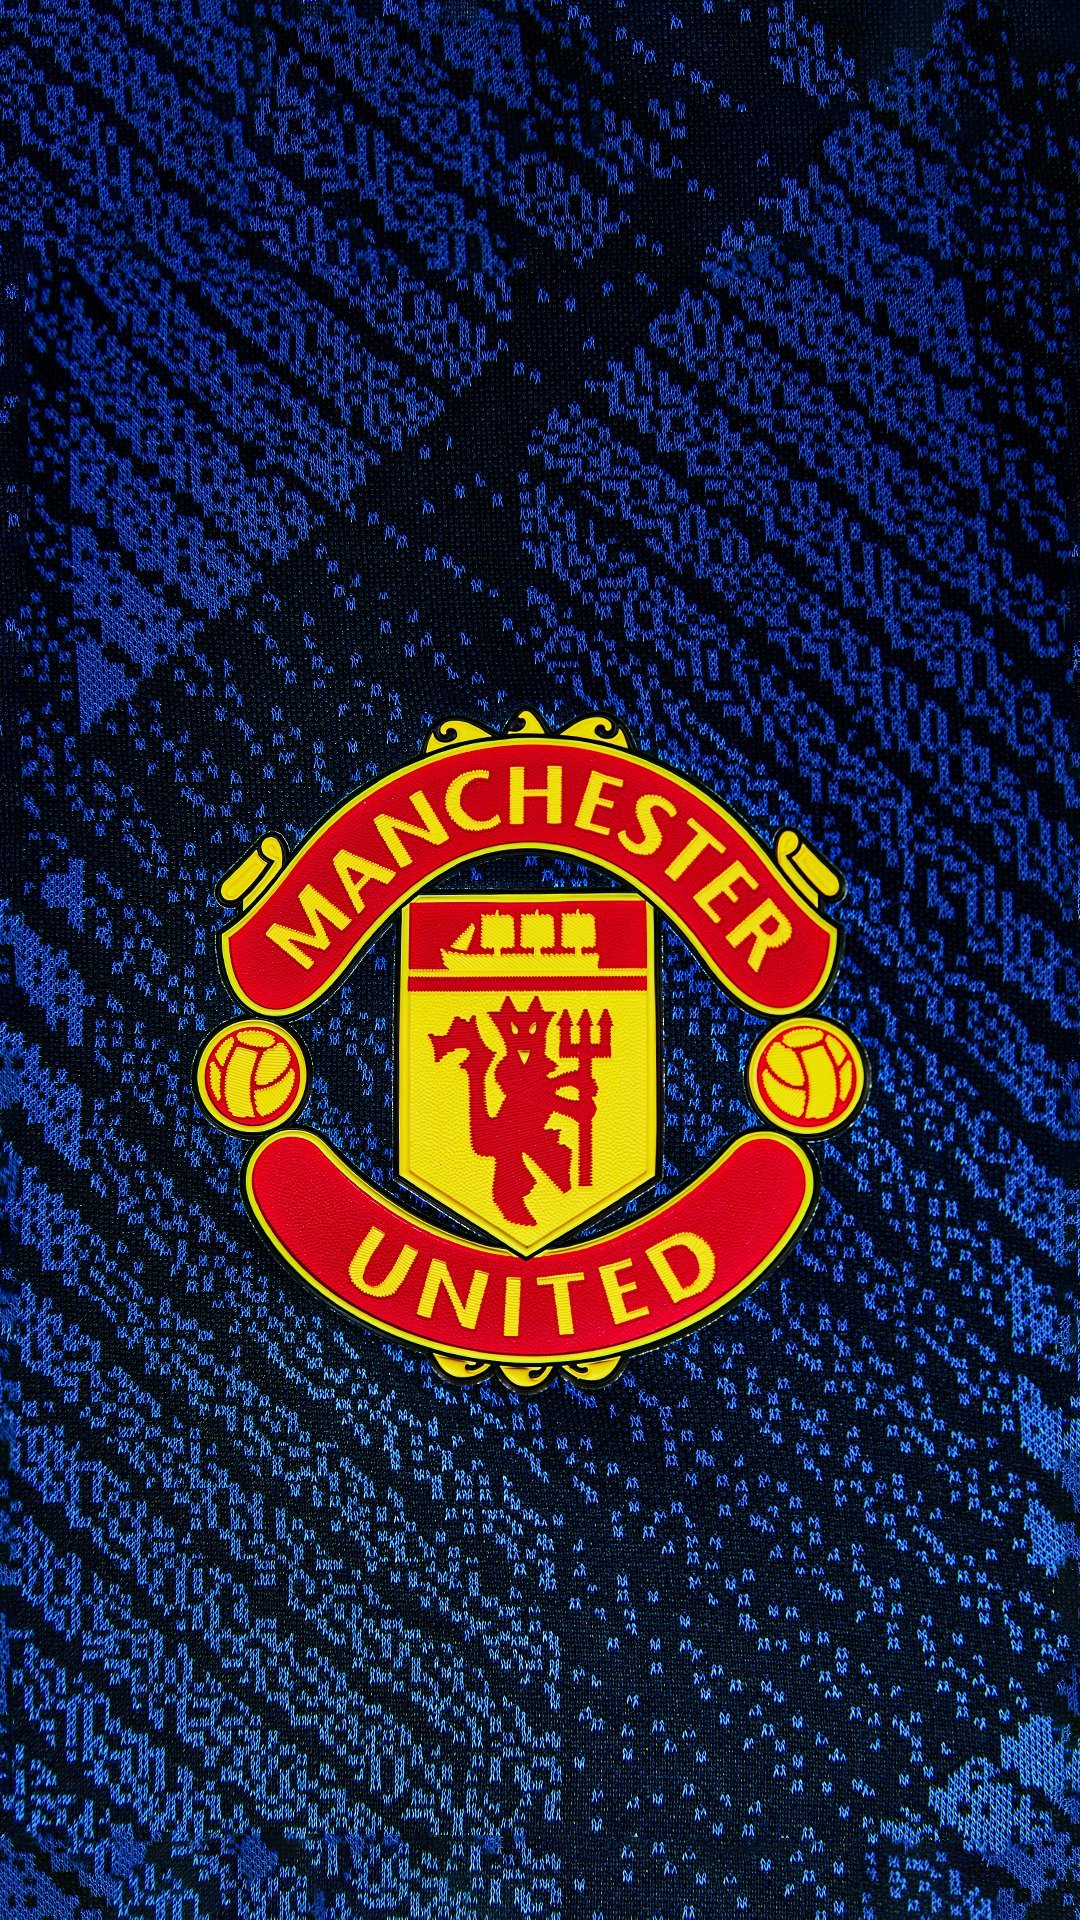 Manchester United wallpaper for every matchday!